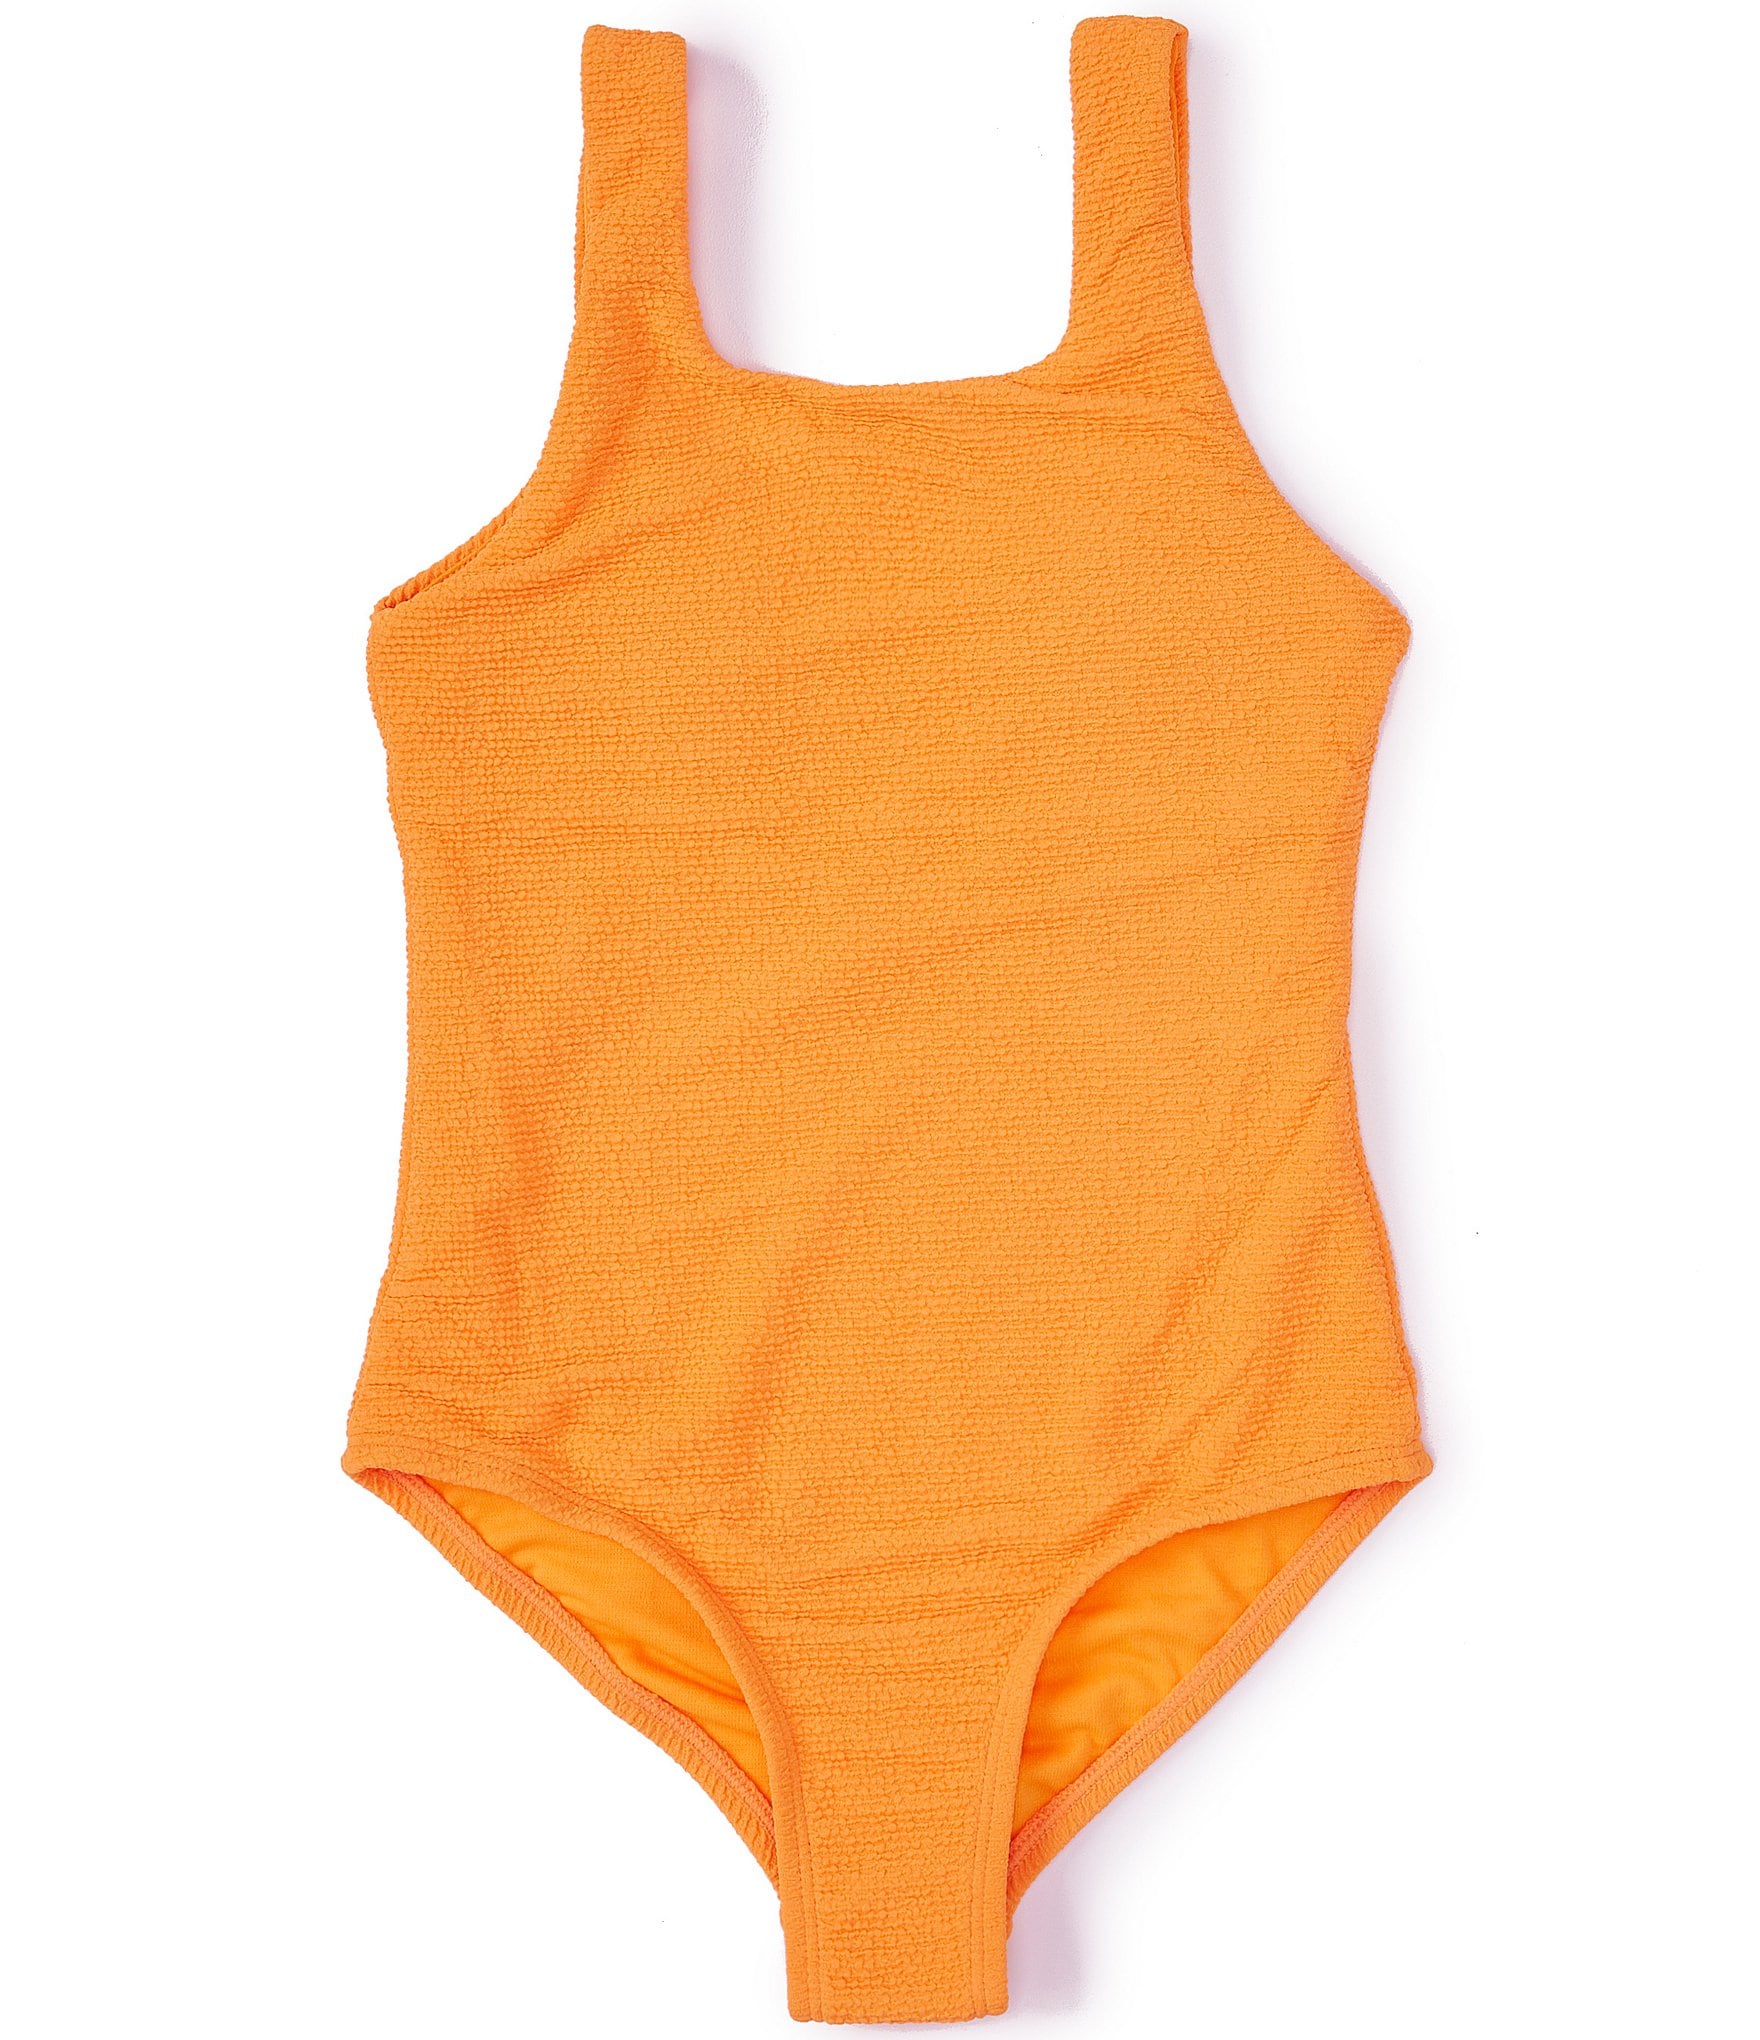 7 Girls' Swimsuits & Cover-Ups for Tweens- Sizes 7-16